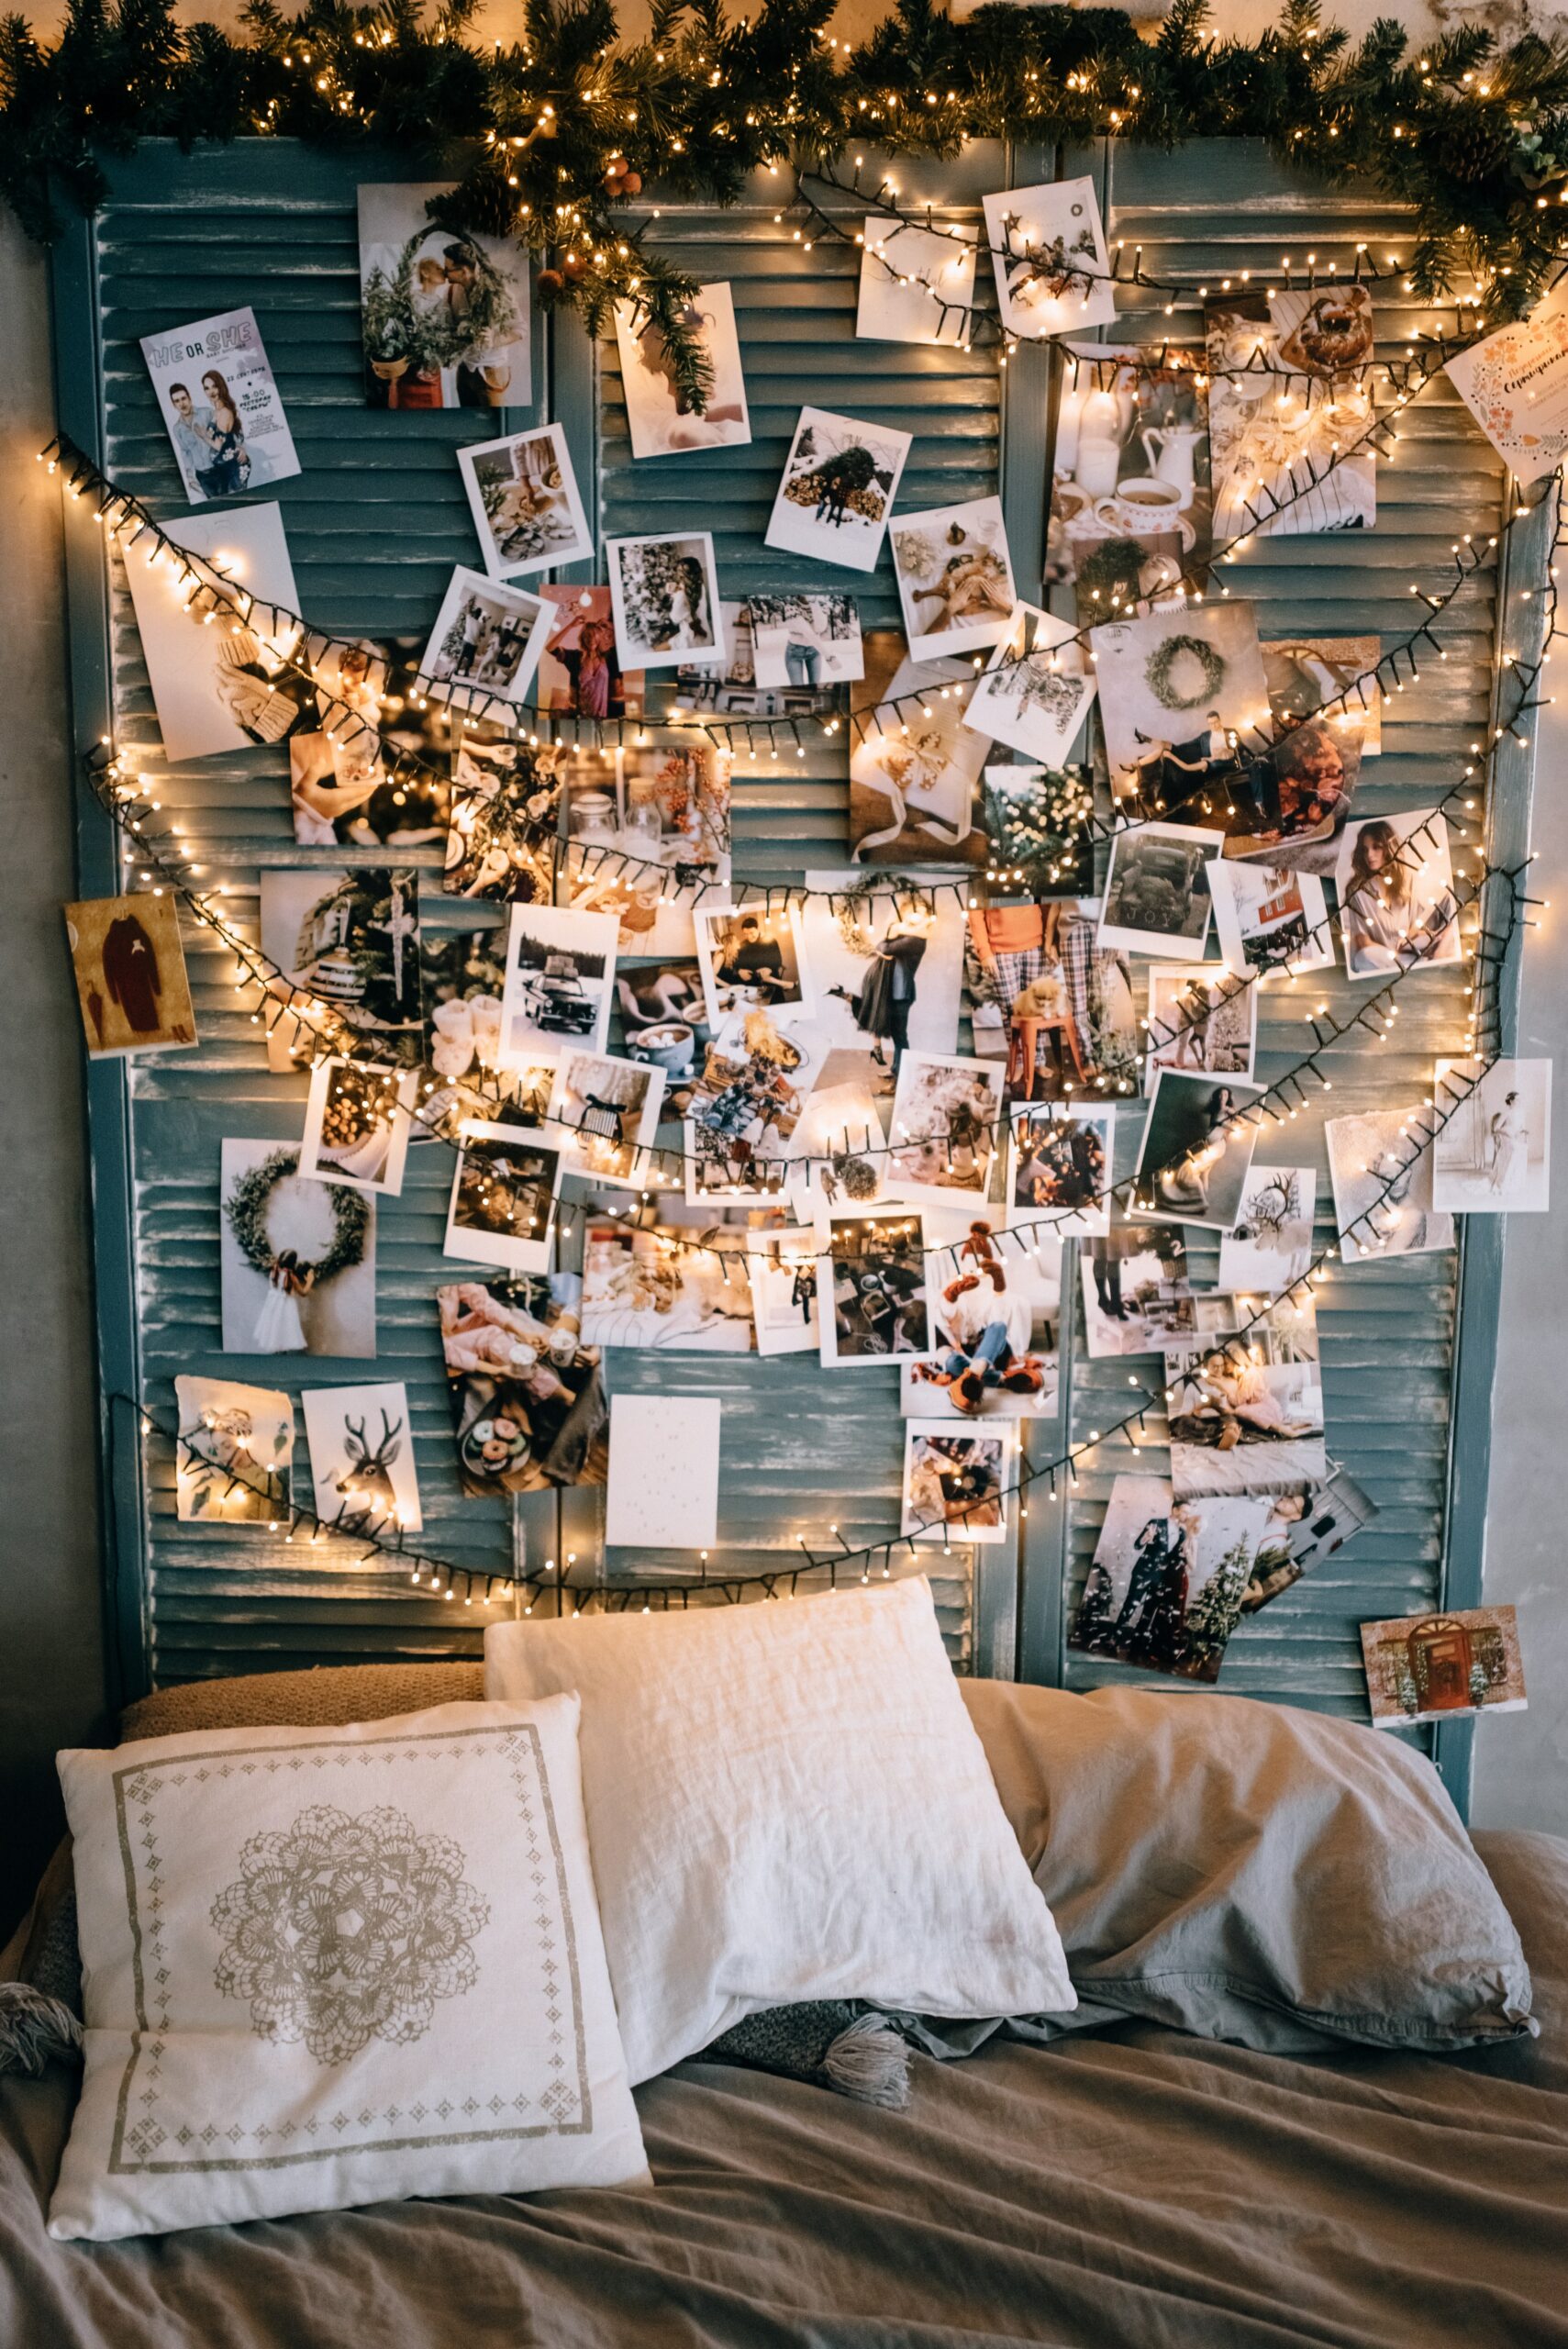 Small pictures on the wall cushions sleeping bed